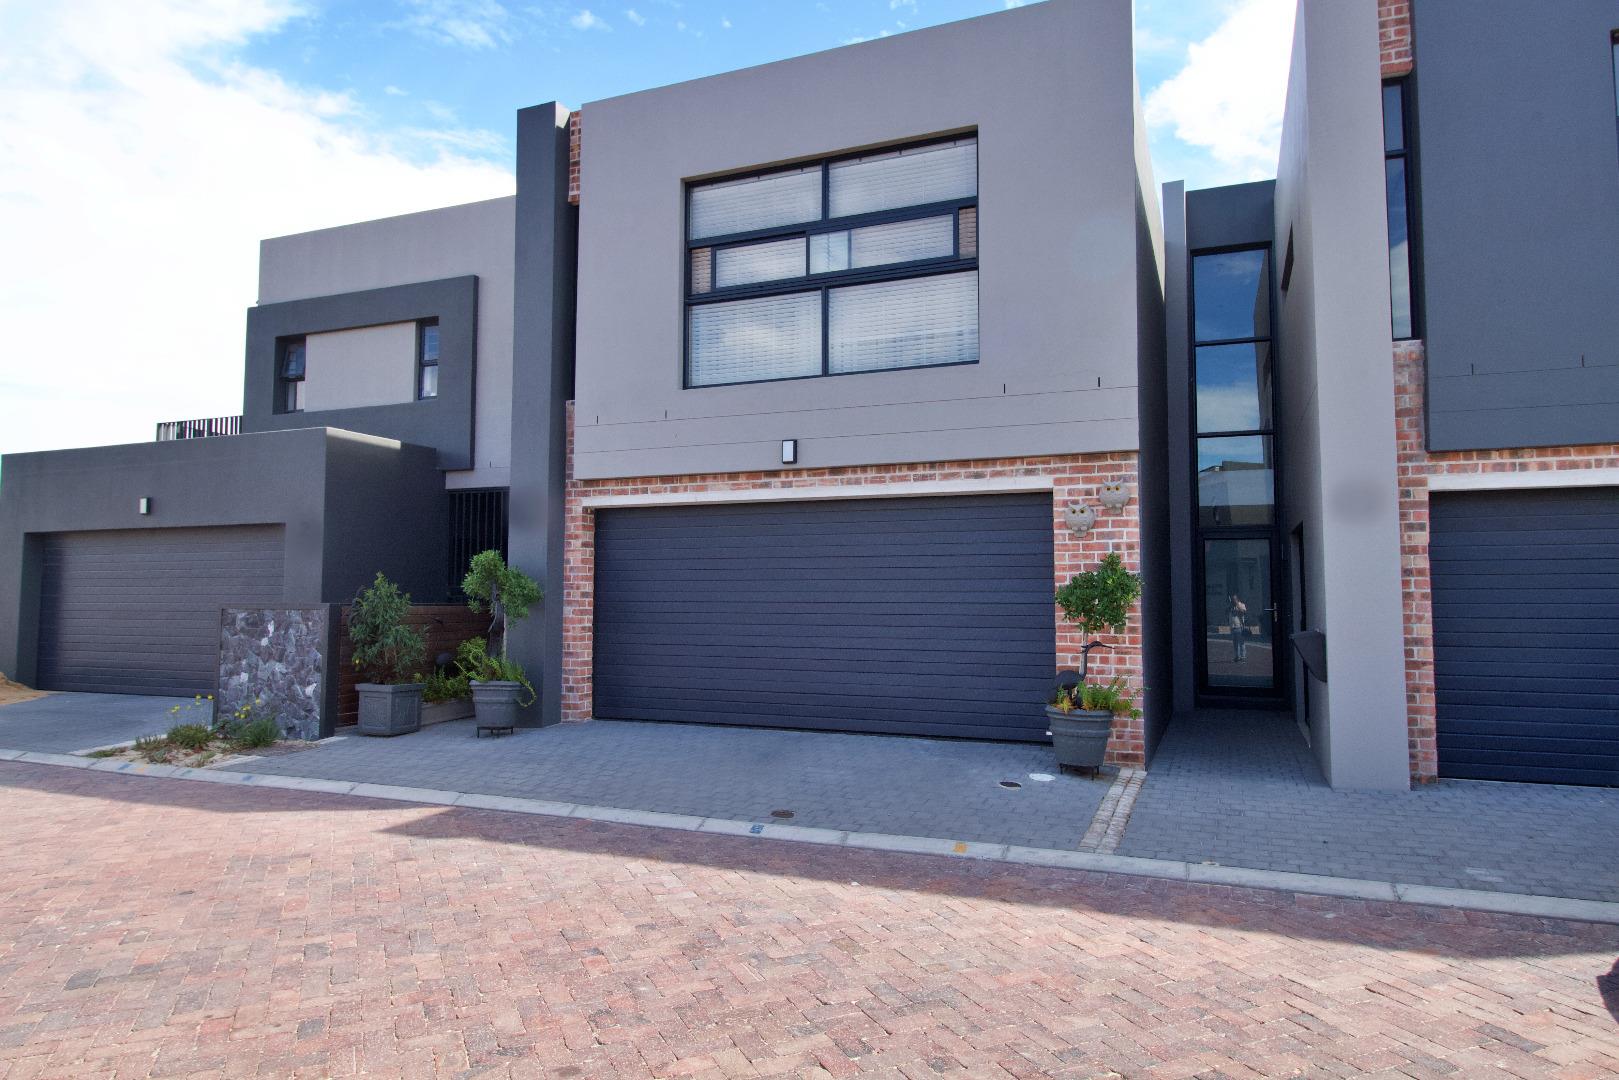 3 Bedroom Duplex for Sale - Western Cape